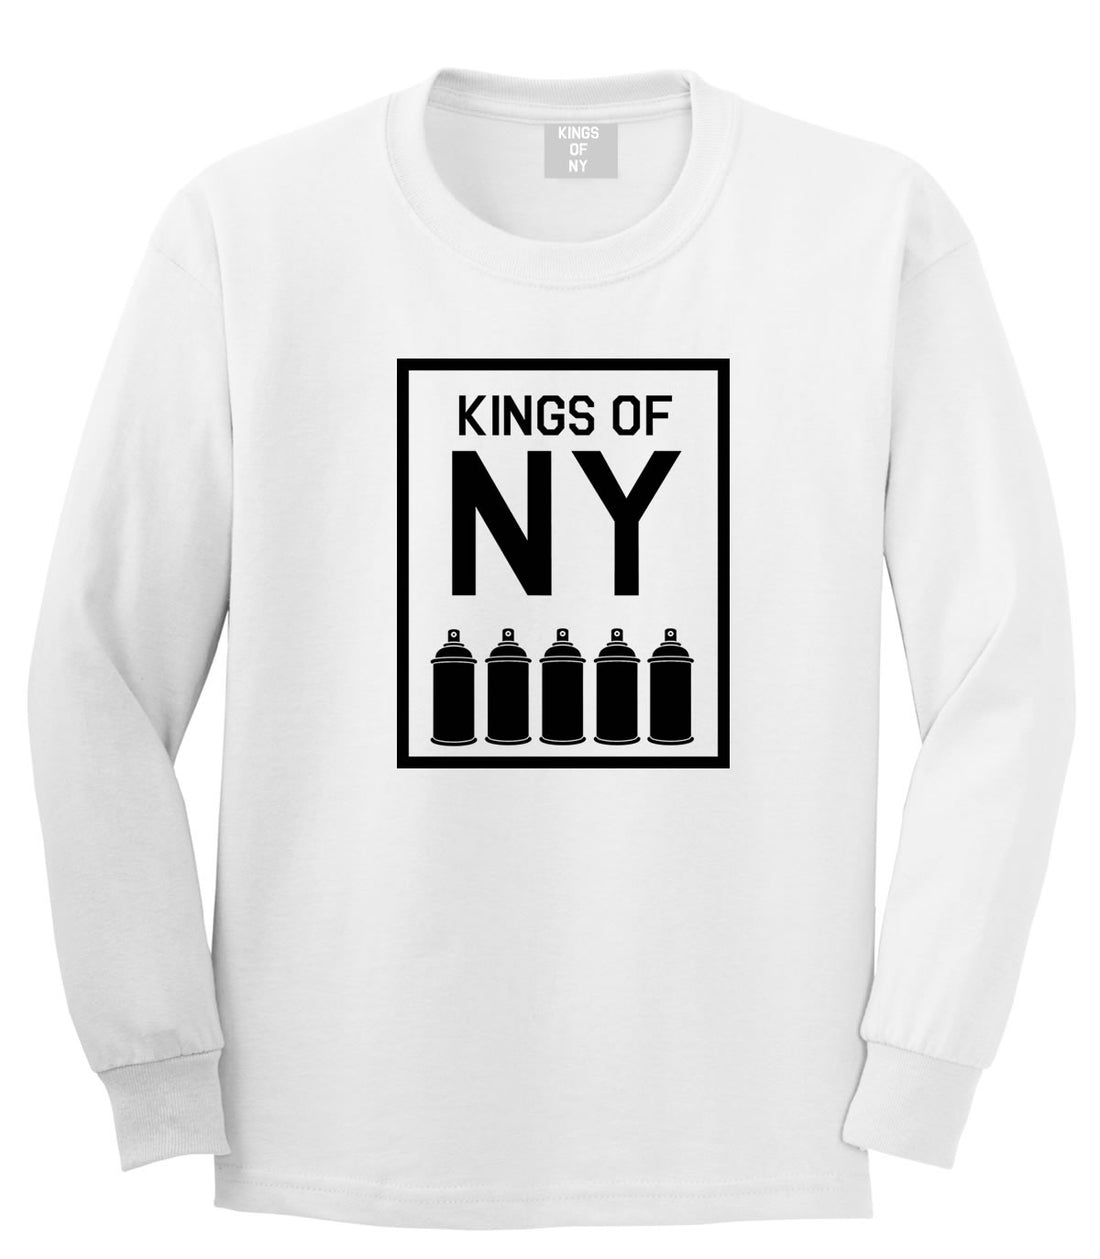 Spray Can Graffiti Long Sleeve T-Shirt in White by Kings Of NY